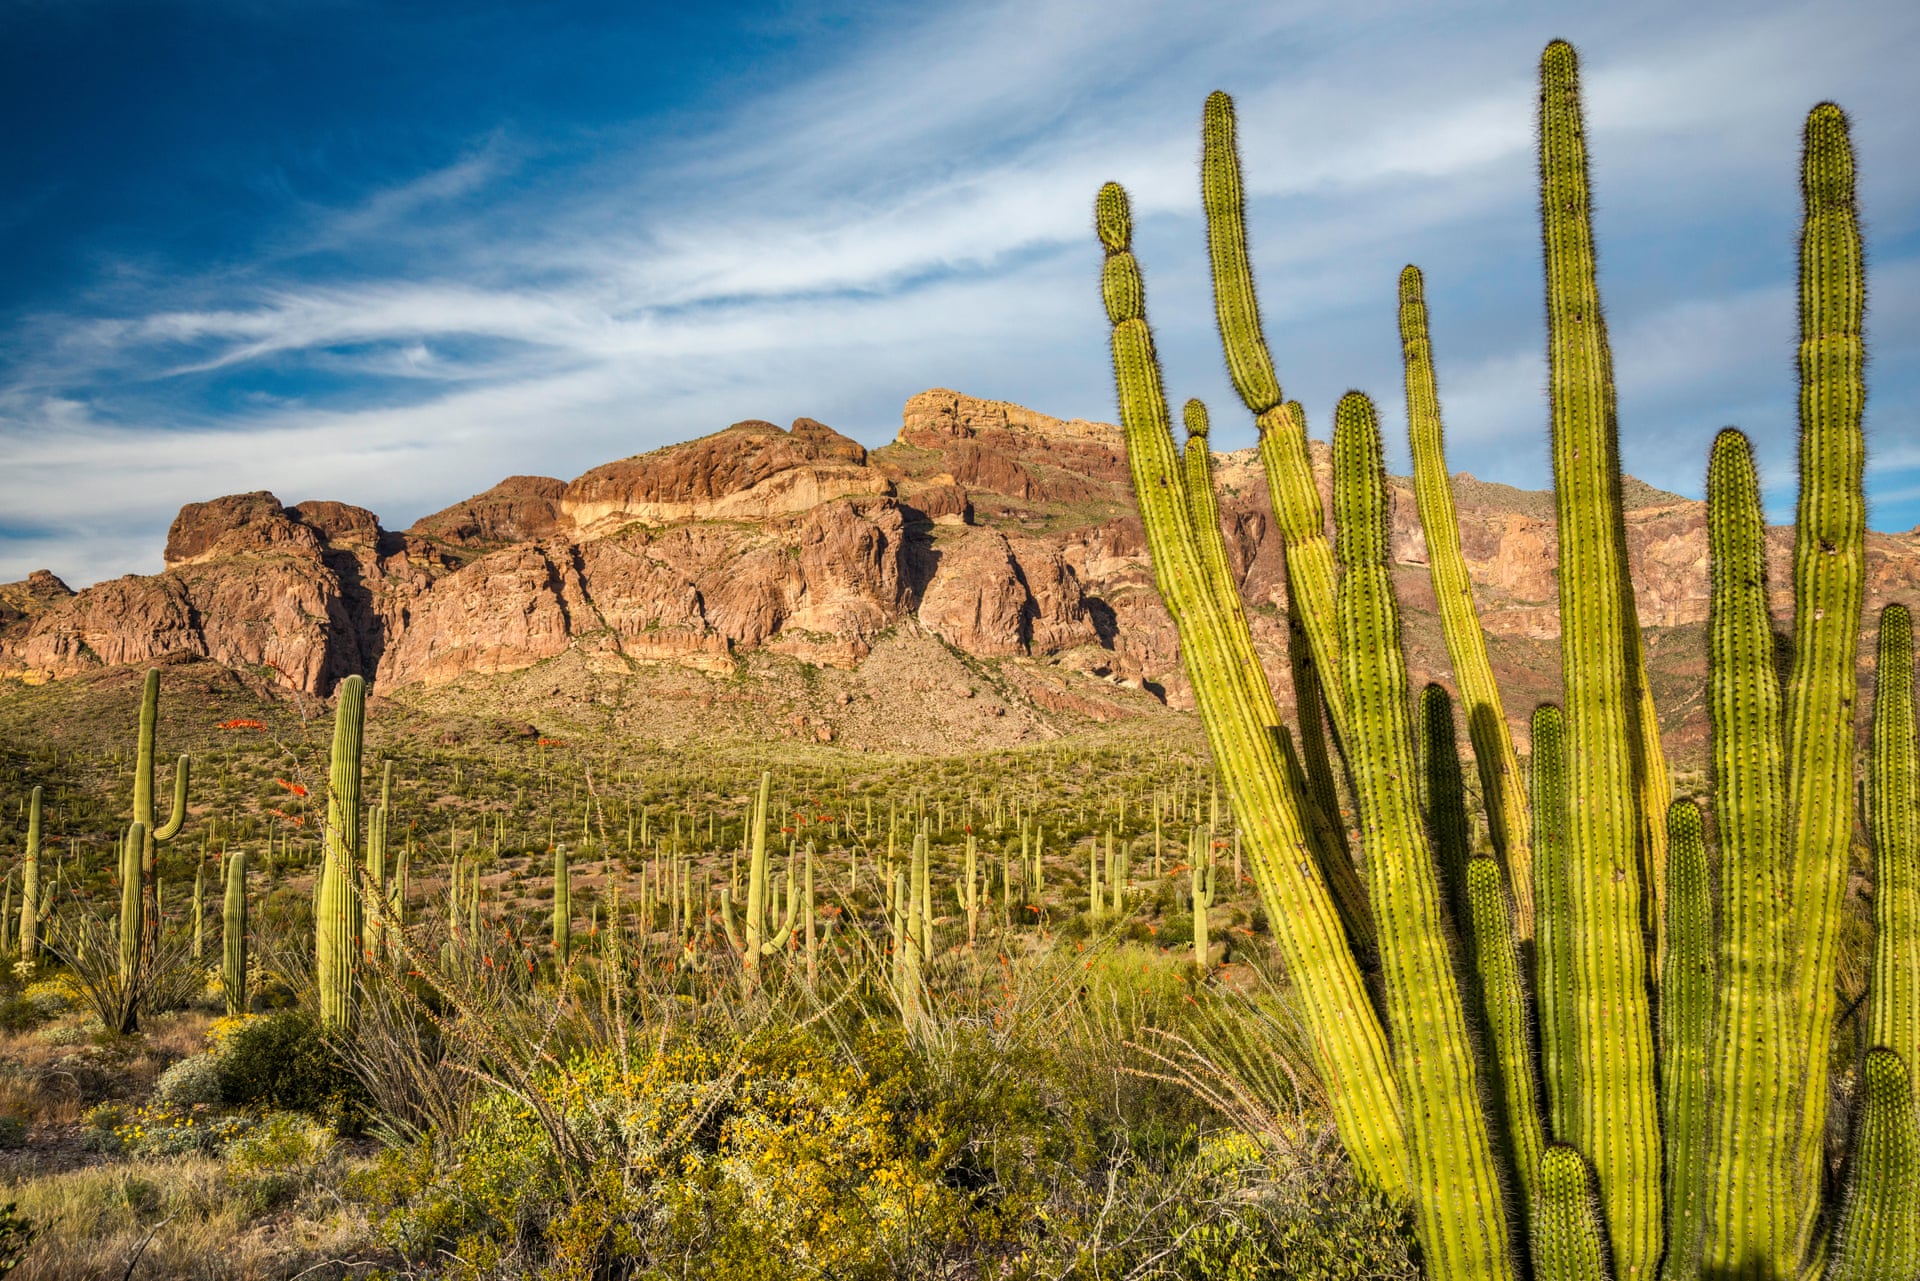 The Organ Pipe Cactus national monument, in southern Arizona, is a federally protected wilderness area and Unesco-recognized international biosphere reserve. Trump’s border wall will traverse the entirety of the southern edge of Organ Pipe Cactus national monument. Photo: Marek Zuk / Alamy